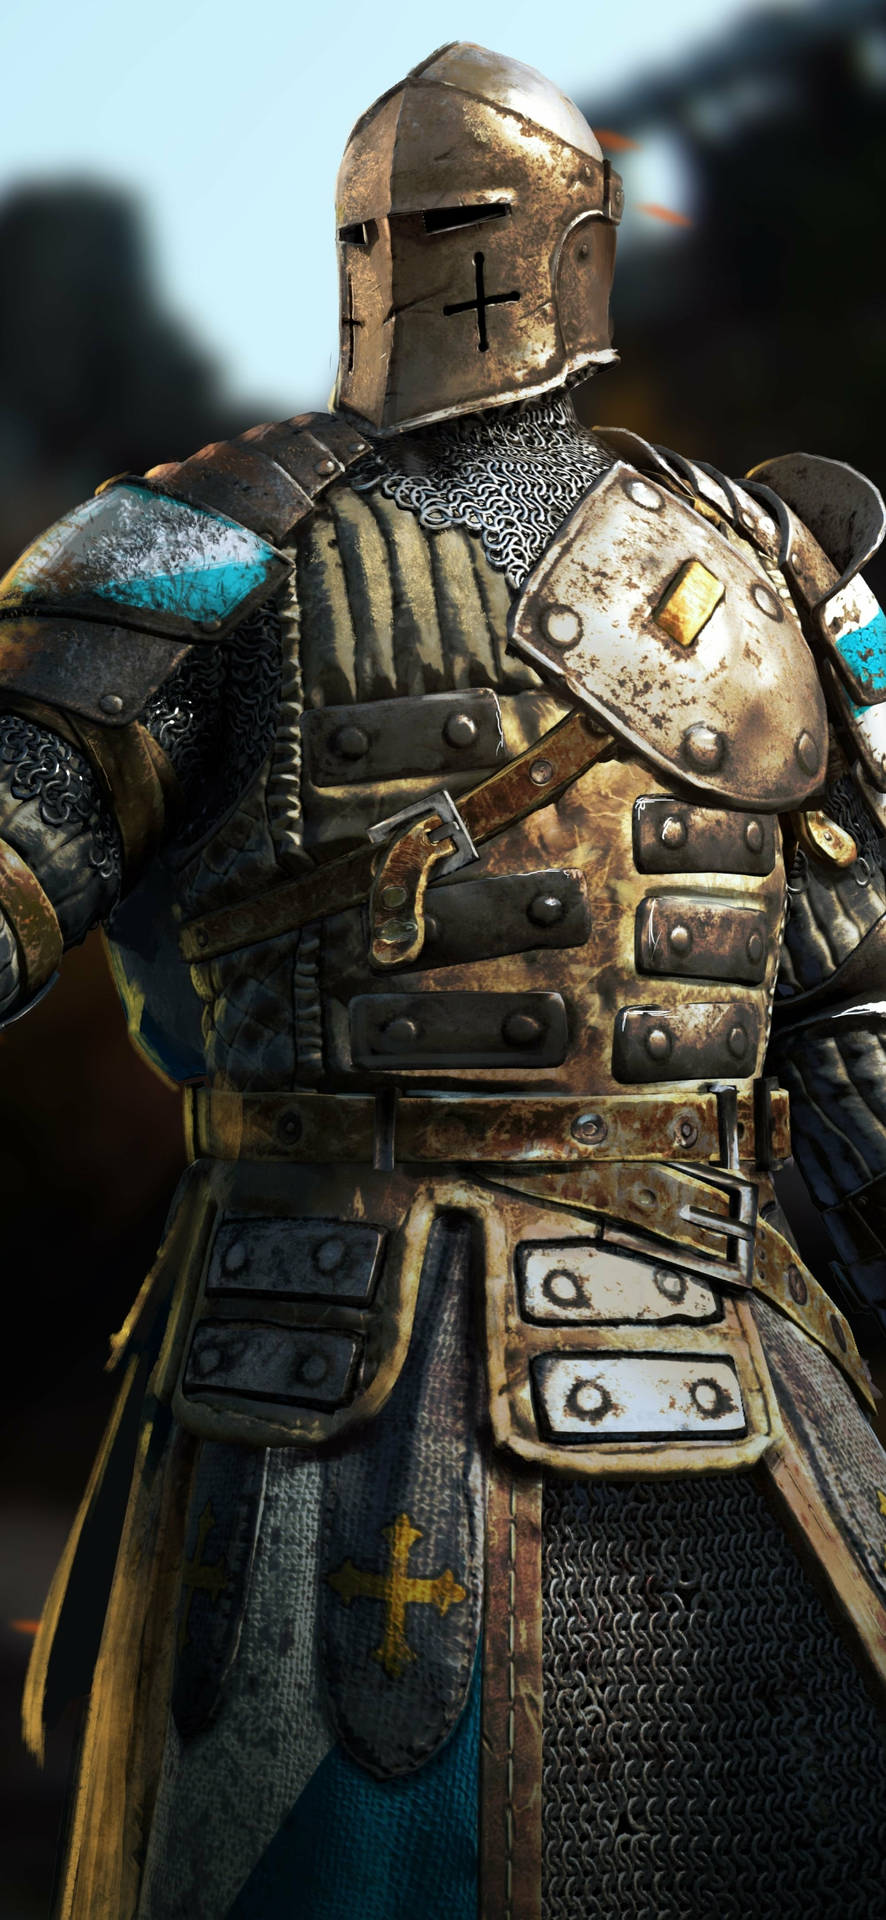 4k Gaming Phone For Honor Warden Background